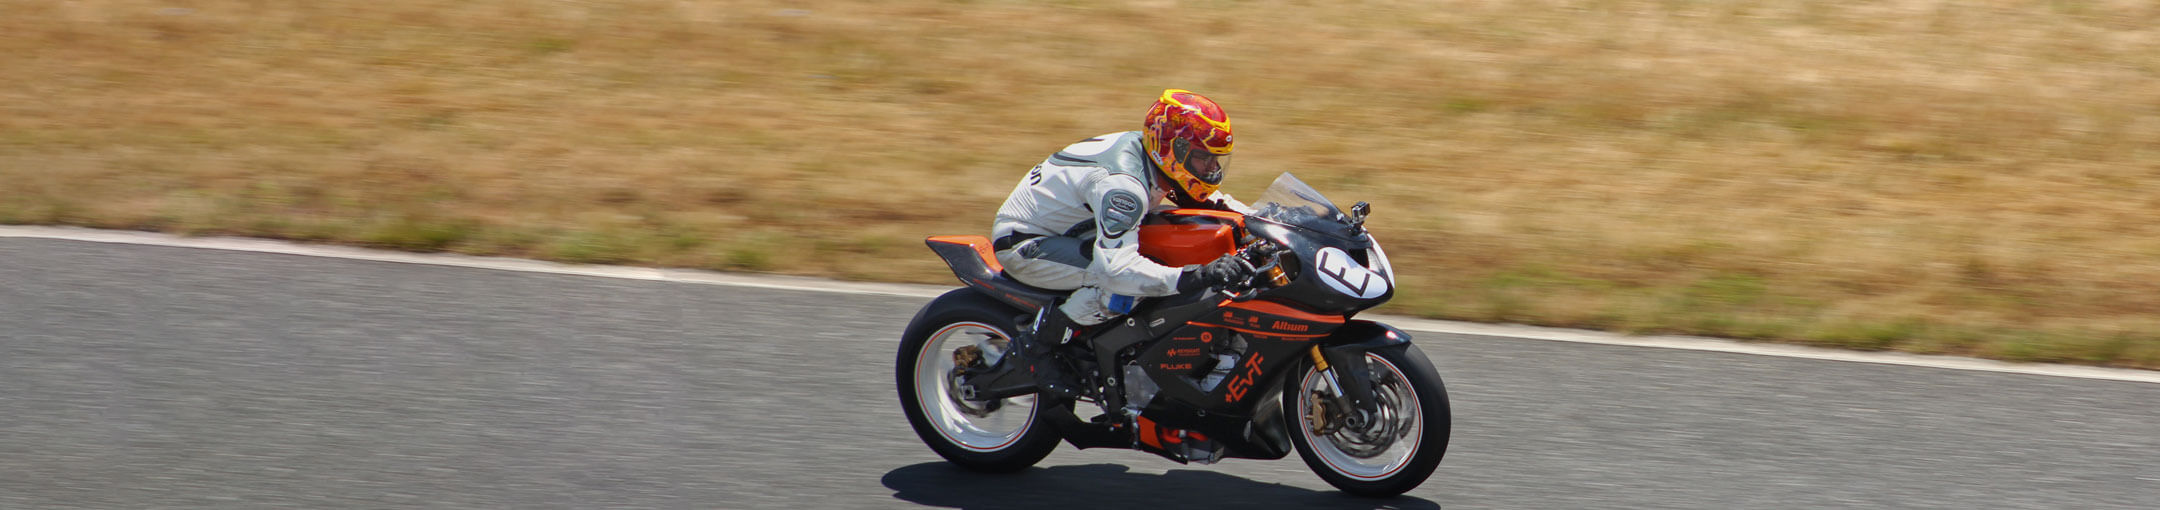 A motorcycle rider driving around a racetrack